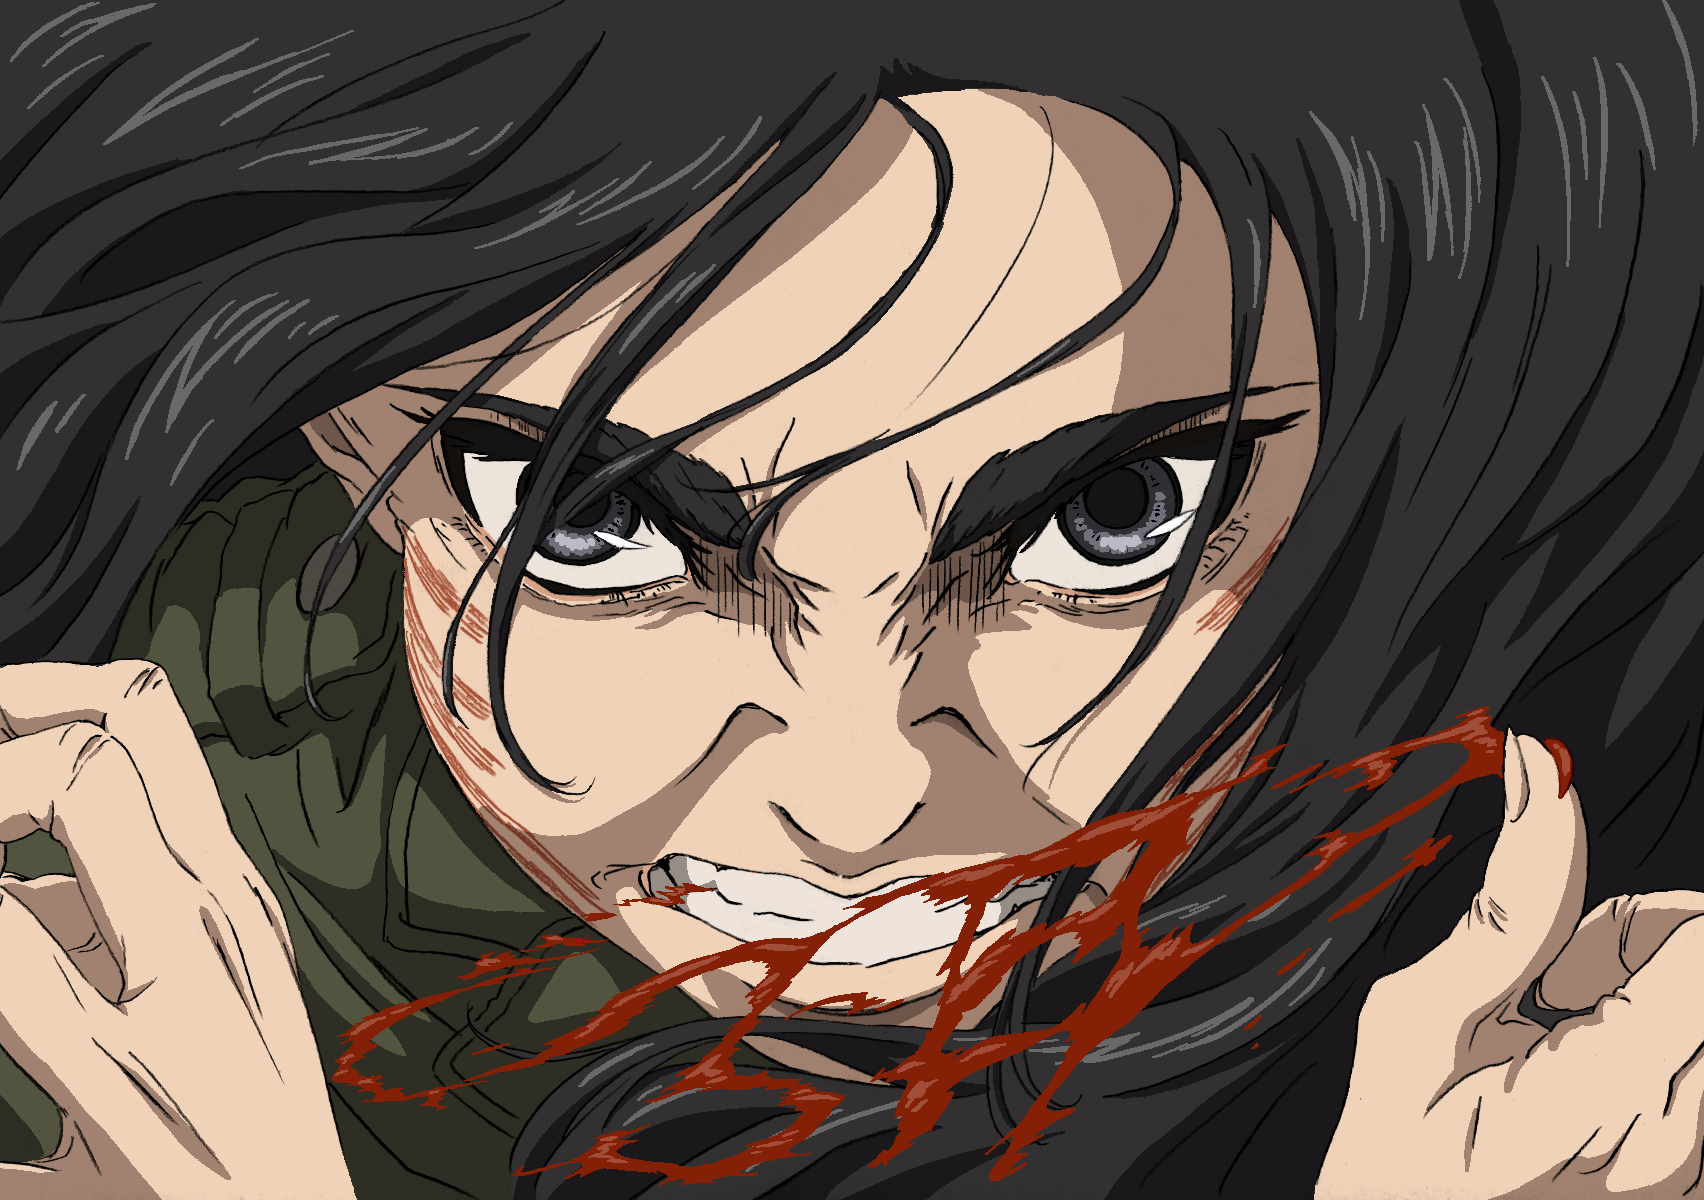 Attack on Titan Countdown Reaches Day 3 With New Illustration of